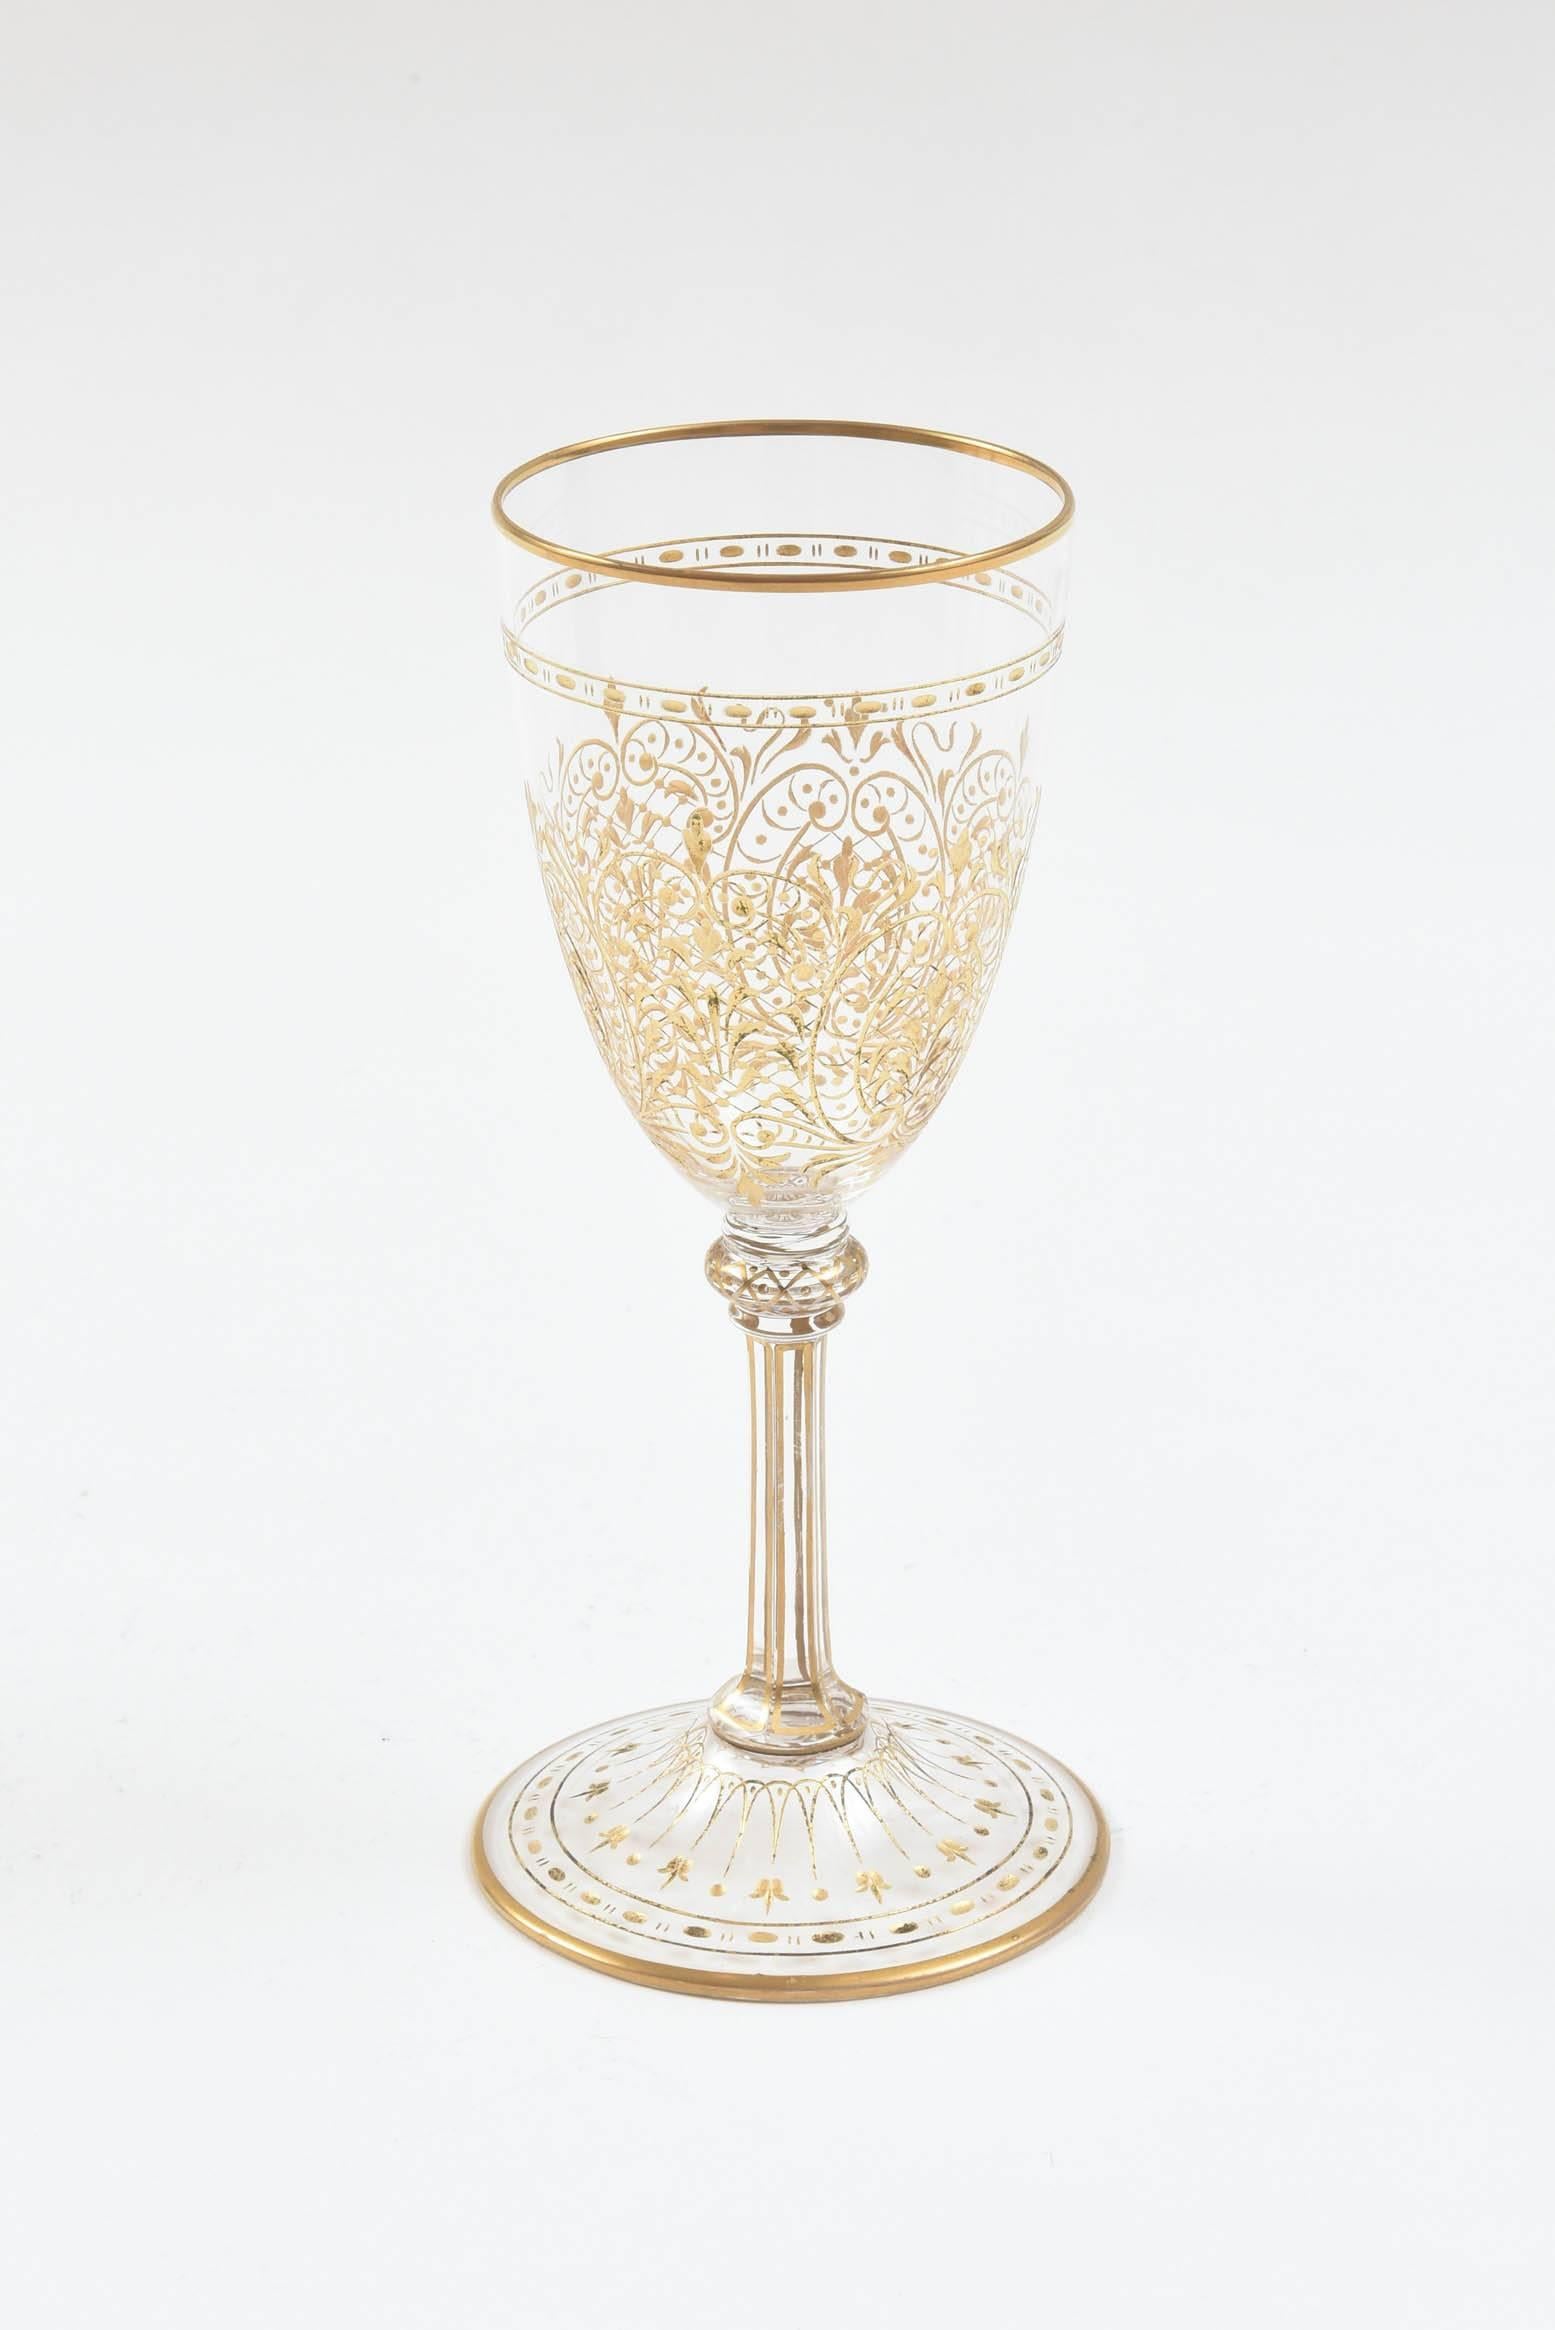 An elegant service with many pieces in a beautifully blown cut crystal design with hand decorated 24-karat gold painstakingly hand applied everywhere. We attribute this set to Moser, The Glass of Kings due to its shape and intricate design and